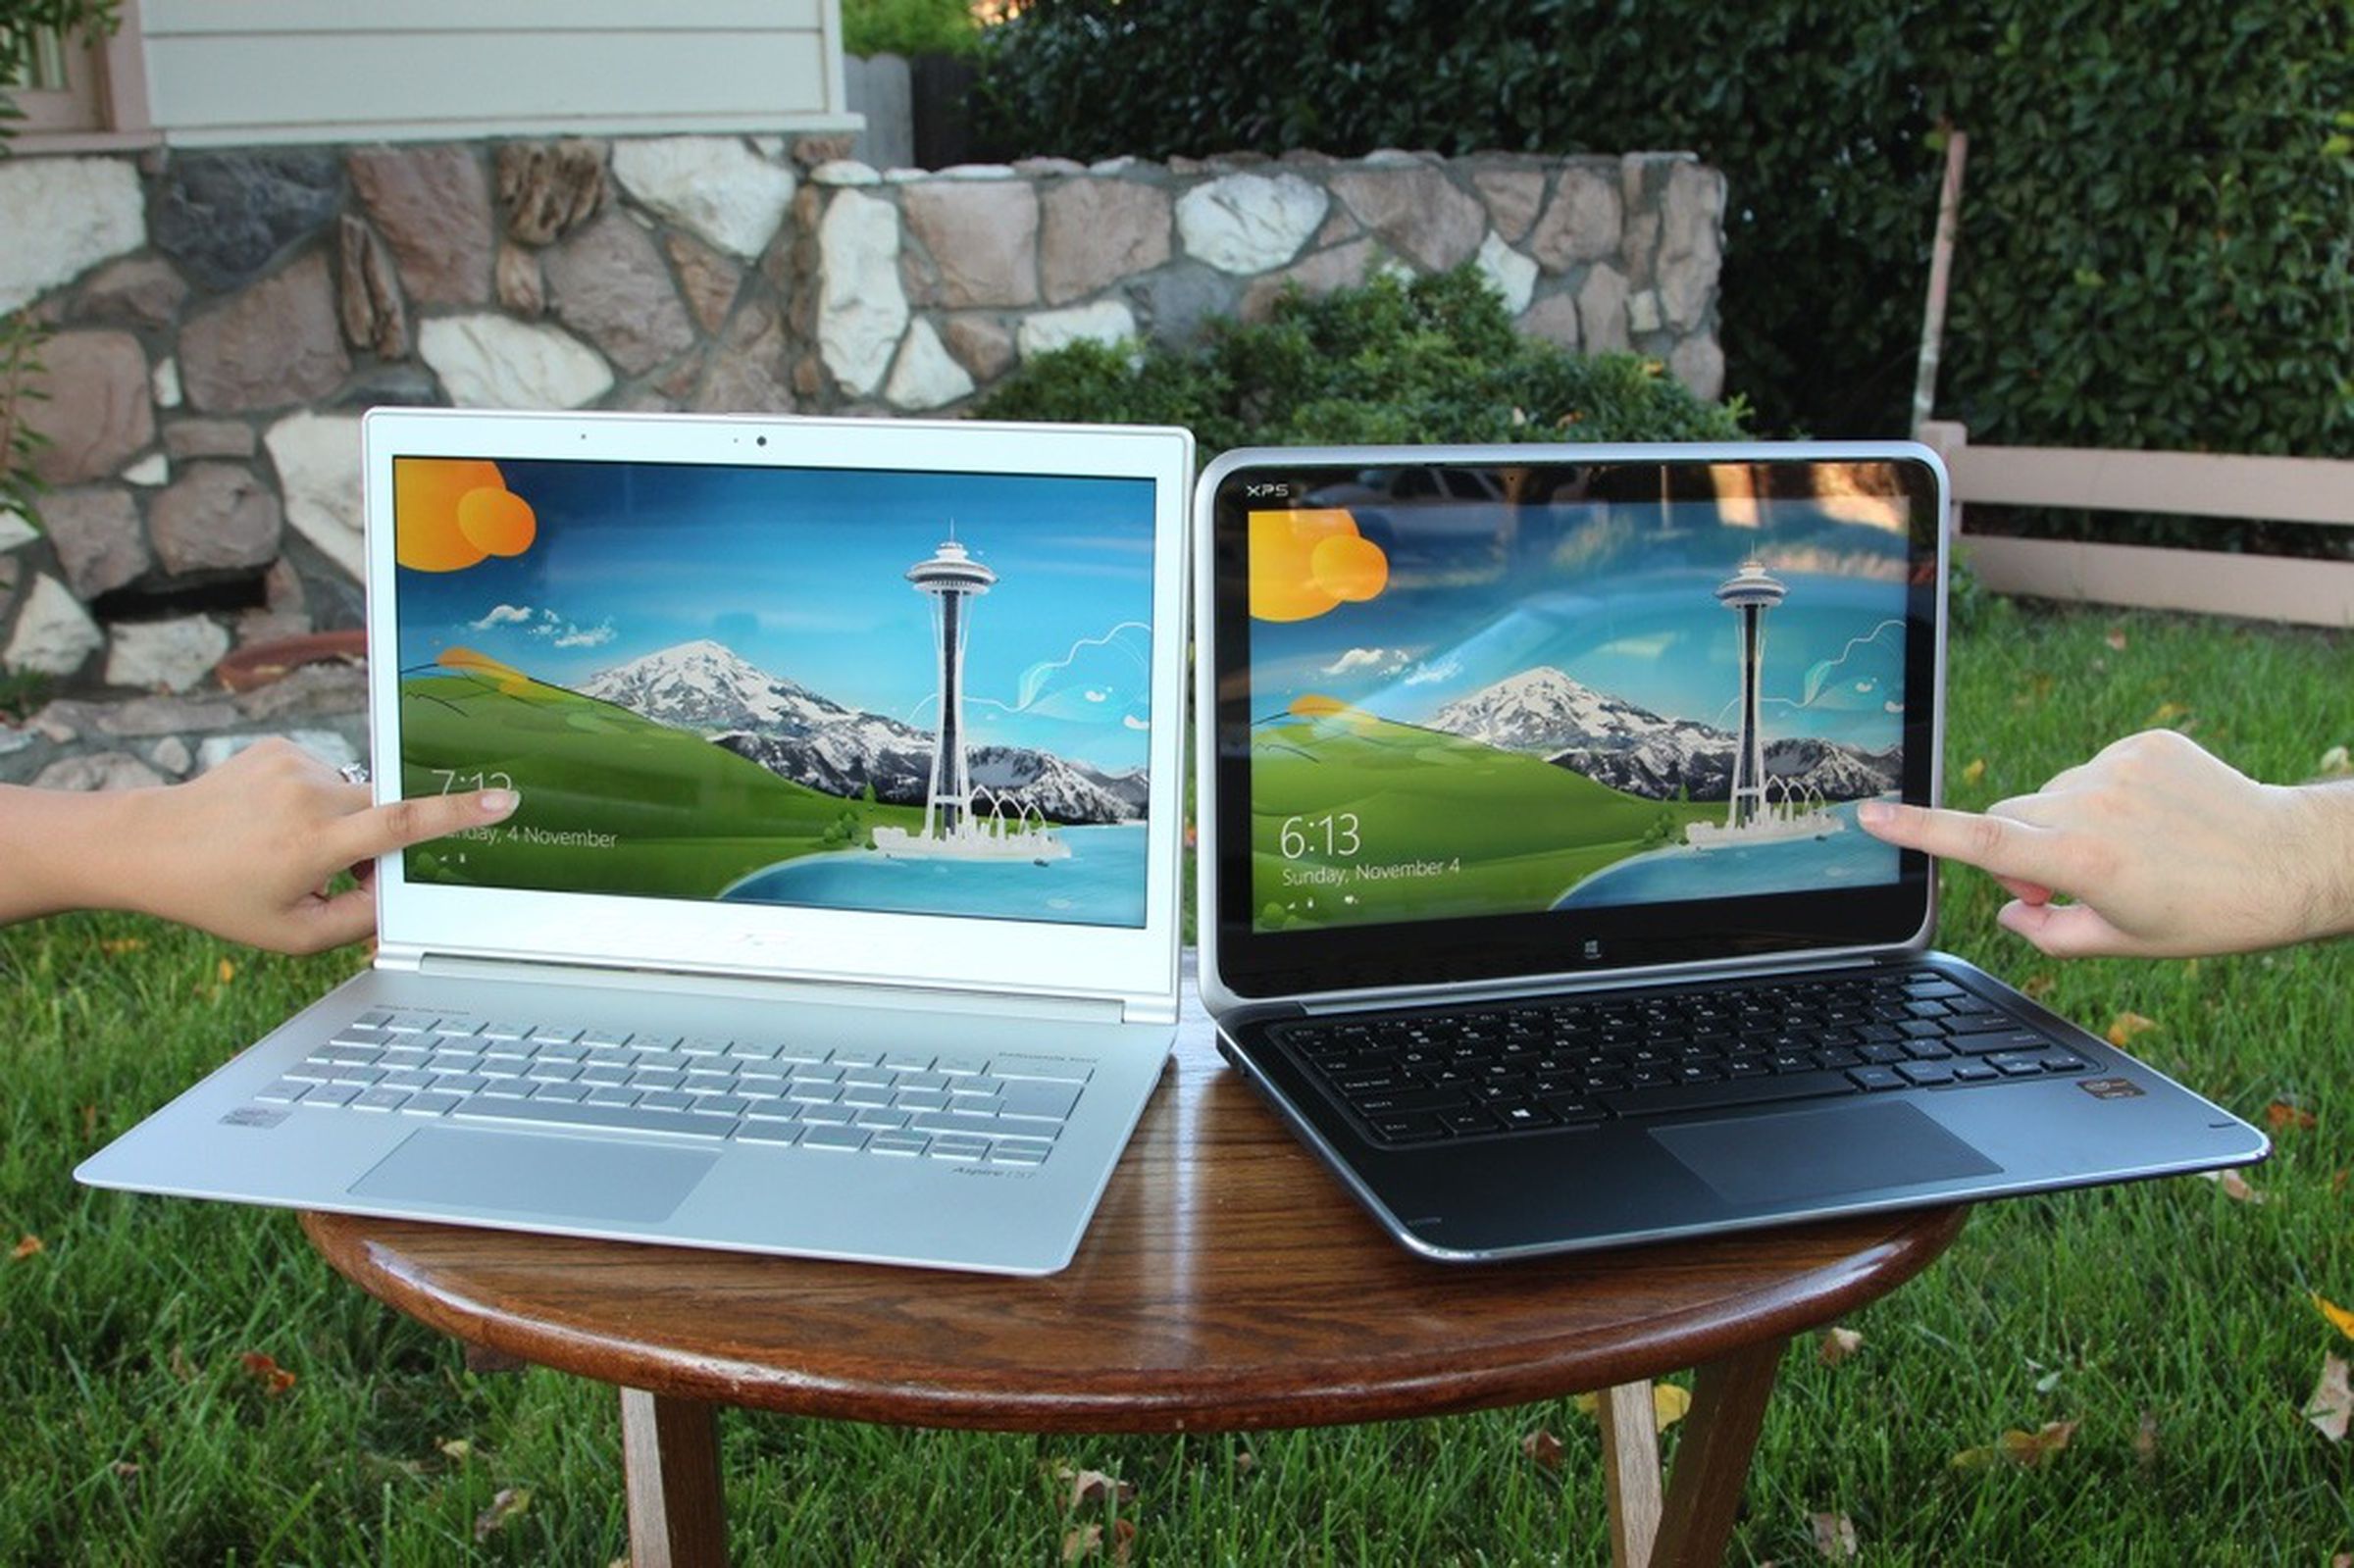 Dell XPS 12 vs. Acer Aspire S7 pictures